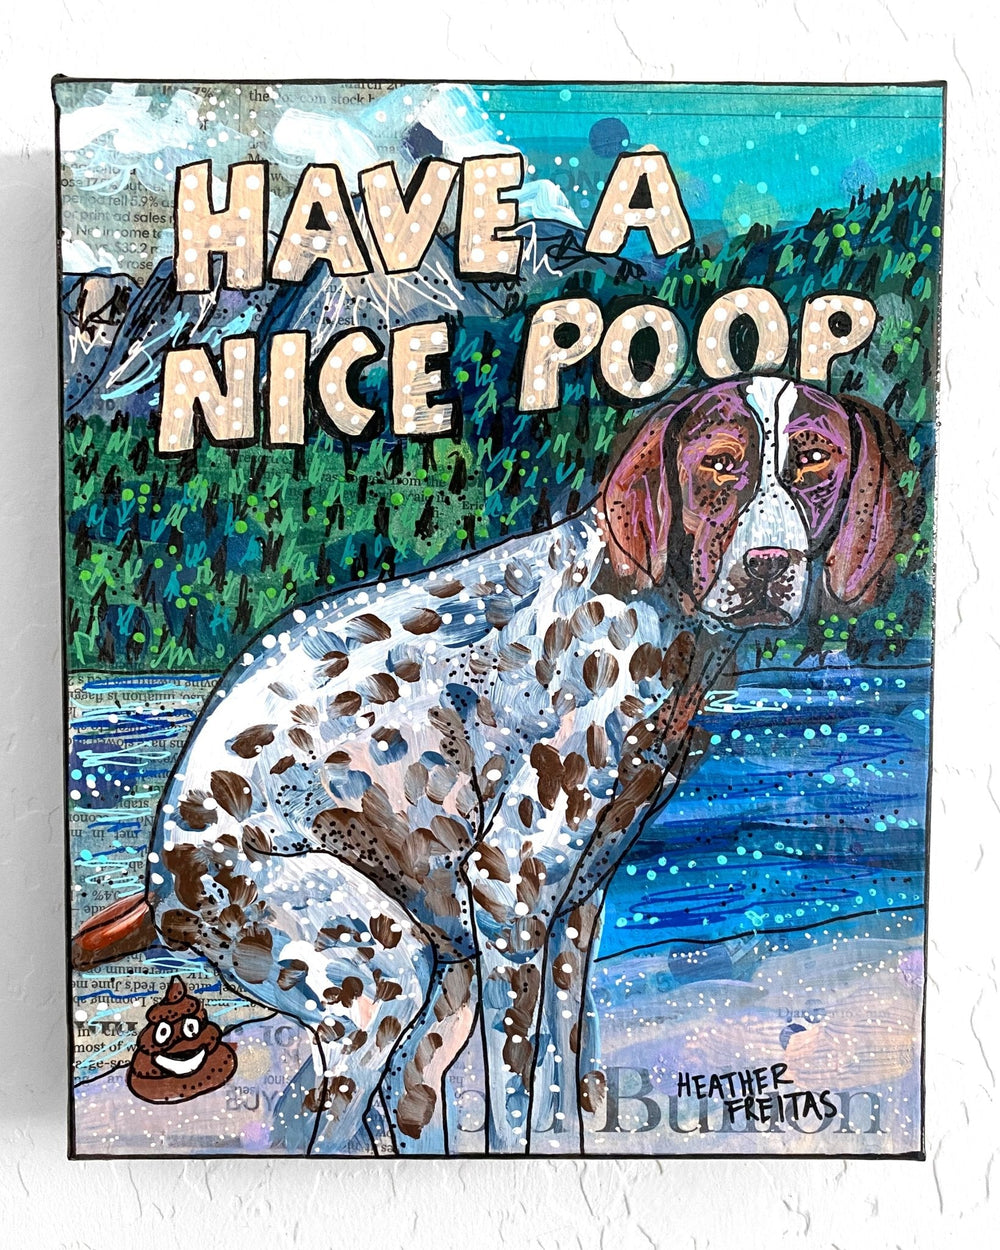 German Shorthaired Pointer Have A Nice Poop ( Original Painting ) - Heather Freitas - fine art home deccor